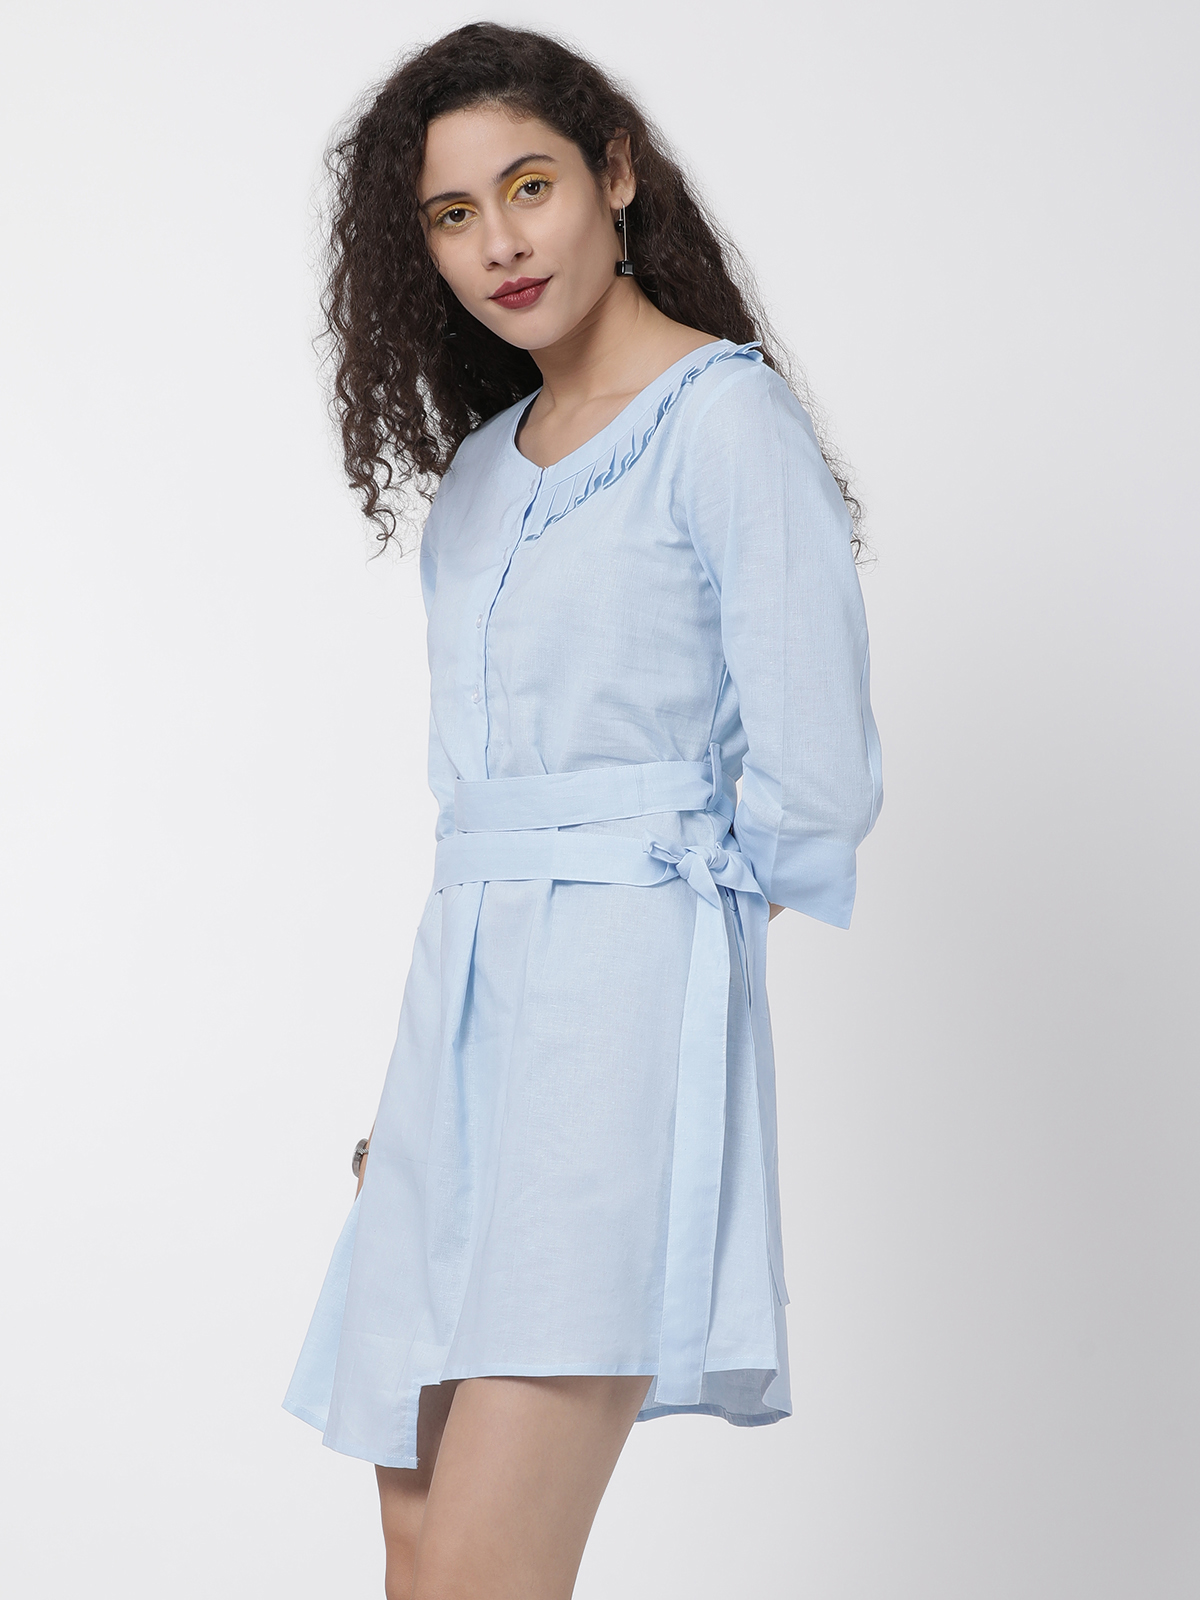  Pretty Blue Cotton Linen Casual One Piece With Self Tie Belt